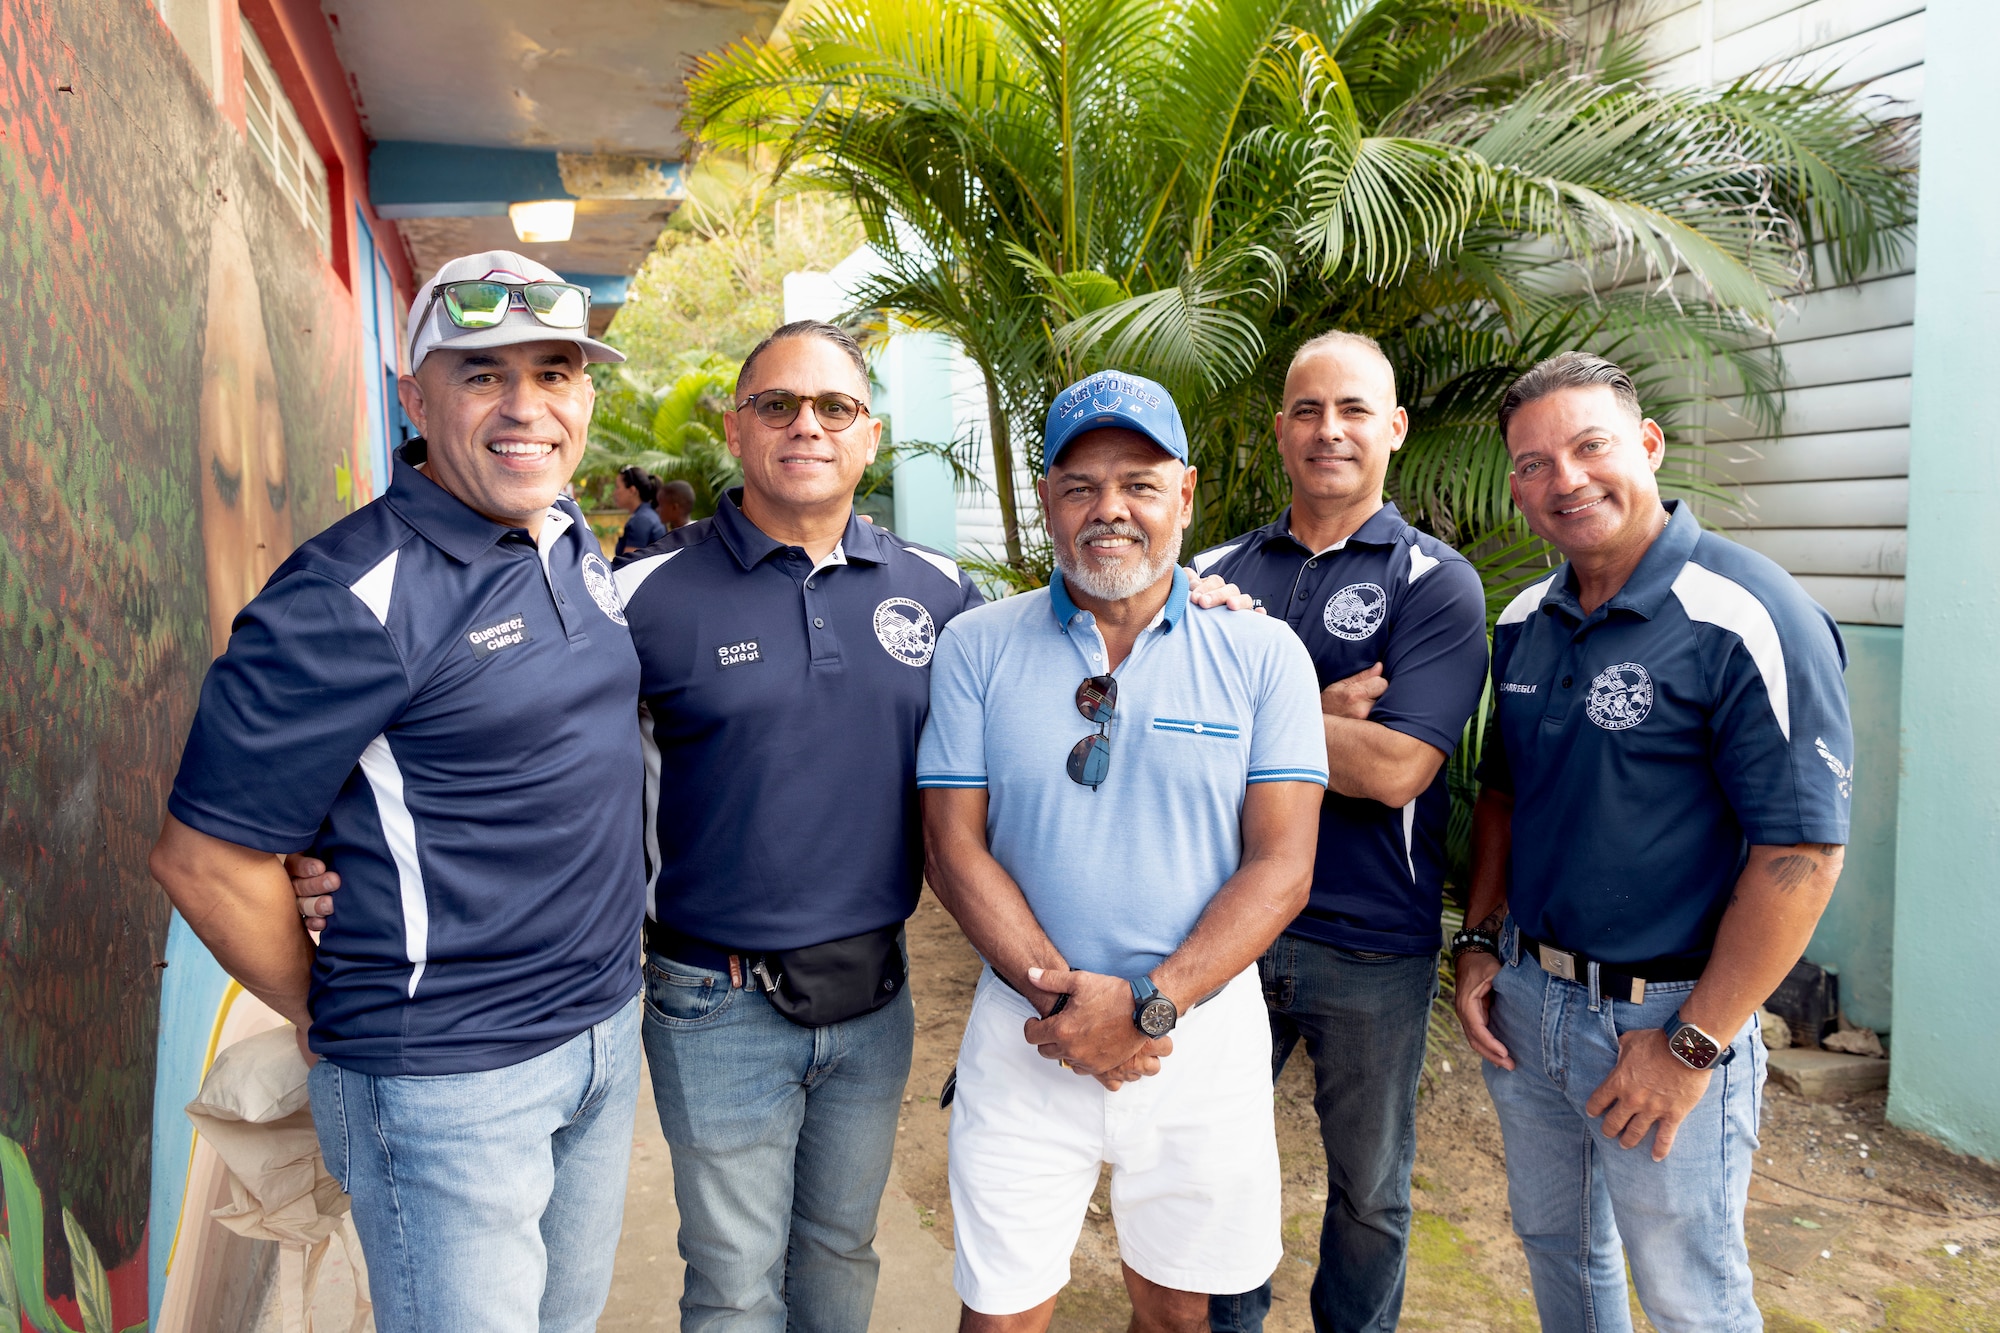 Members of the 156th Wing Chiefs Council, Puerto Rico Air National Guard, and Retired U.S. Air Force Master Sgt. Juan C. Diaz, former PRANG Airman, center, pose for a photo during a Three Kings eve event at Loiza, Puerto Rico, Jan. 5, 2024. For 48 consecutive years, the PRANG has honored a Puerto Rican tradition, Three Kings Day, by impacting the Piñones community through a yearly event where the 156th Wing Chiefs Council and U.S. Airmen partnered with local non-profit organizations to impact hundreds of children with ages ranging from newborn to 12-years-old, during the eve of Three Kings Day. (U.S. Air National Guard photo by Airman 1st Class Sharymel Montalvo Velez)